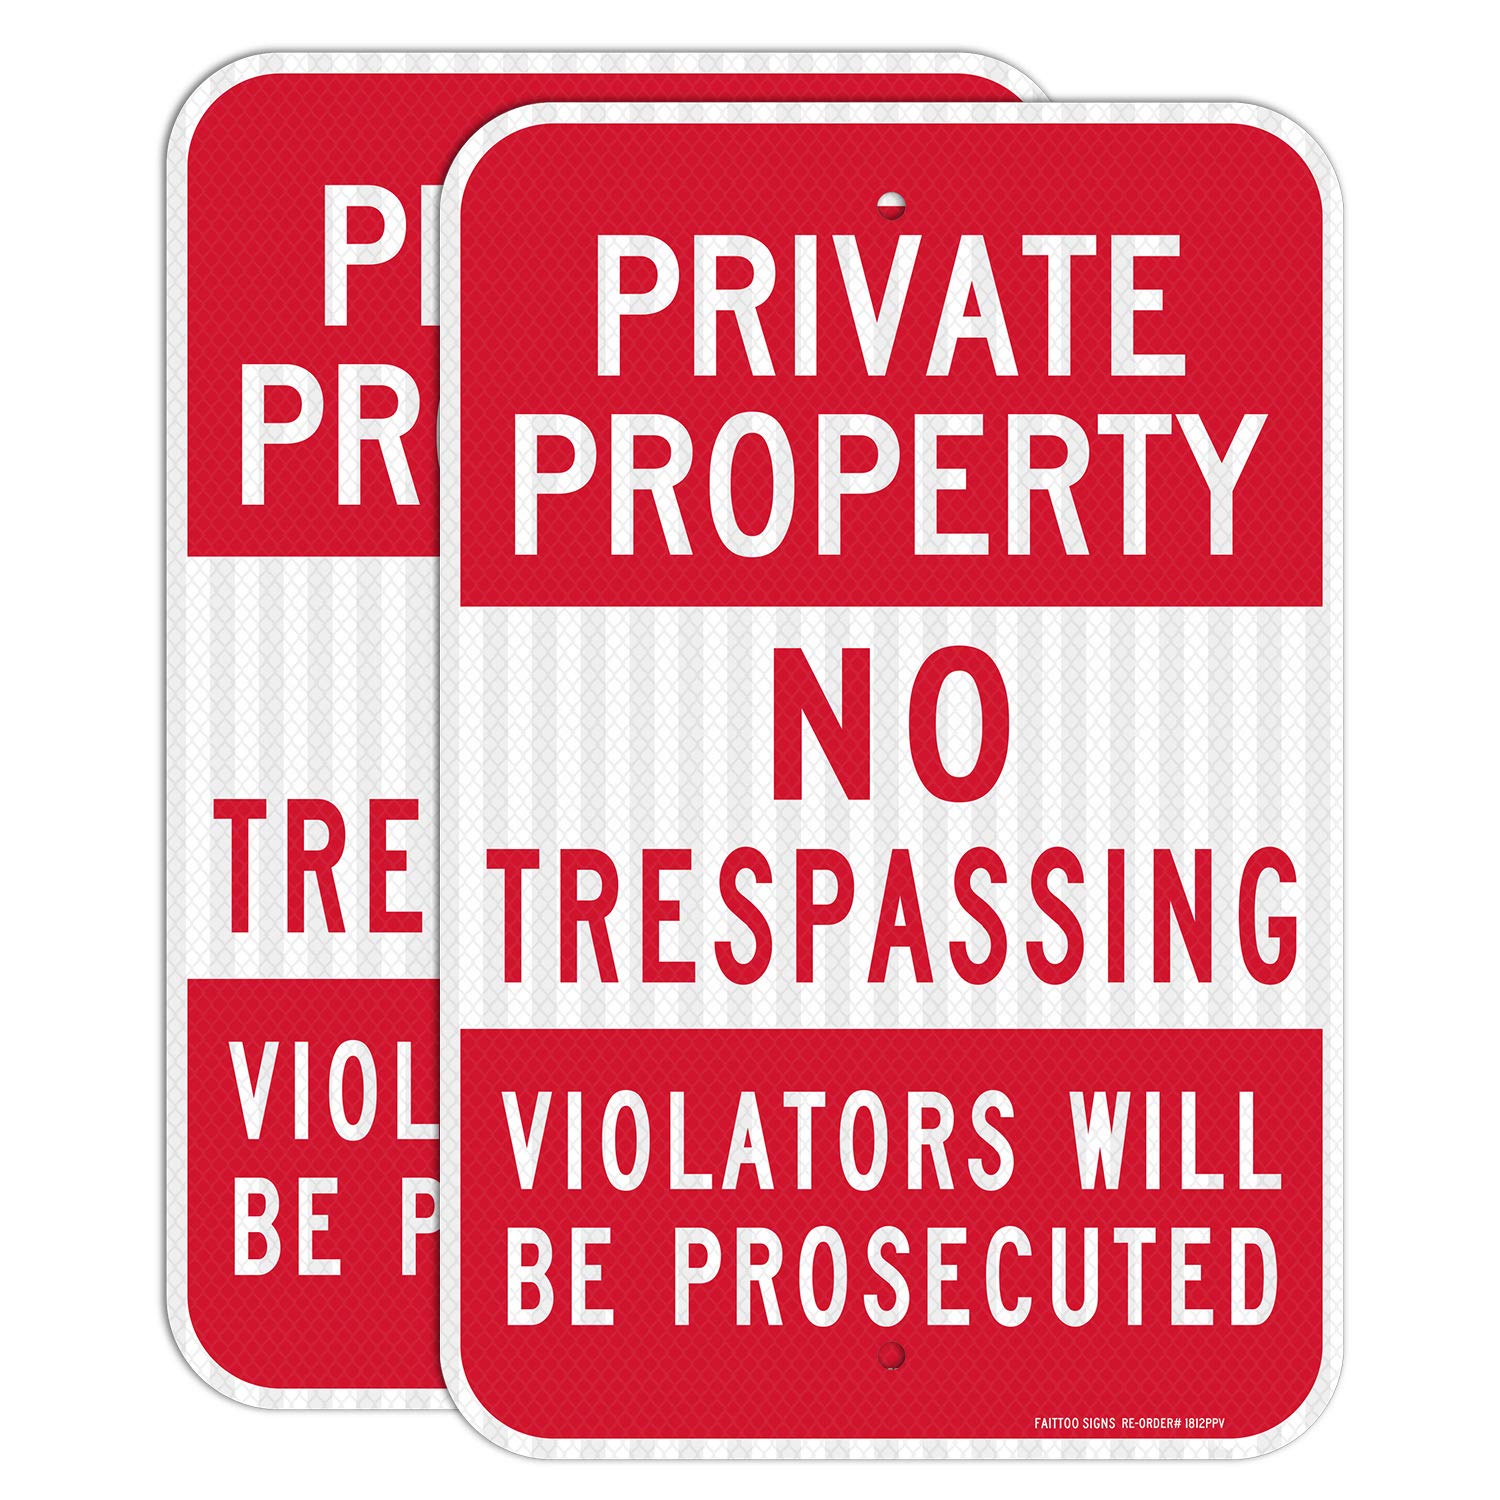 (2 Pack) Private Property No Trespassing Sign, Violators Will Be Prosecuted, 18 x 12 Engineer Grade Reflective Sheeting Rust Free Aluminum, Weather Resistant, Waterproof, Durable Ink, Easy to Mount